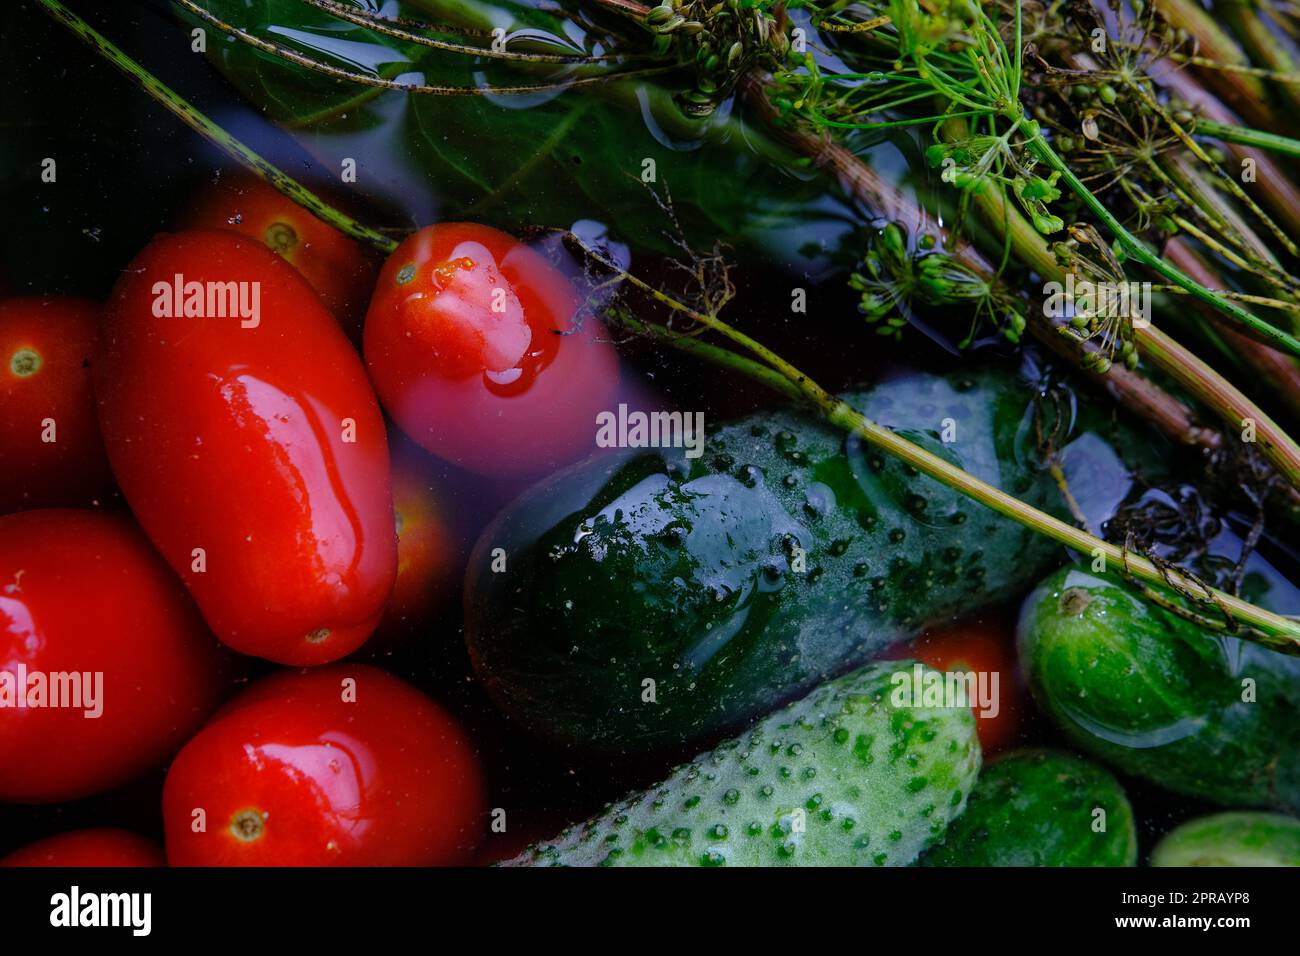 The cucumbers, tomatoes, and dill are ready for pickling once they have been picked. Stock Photo